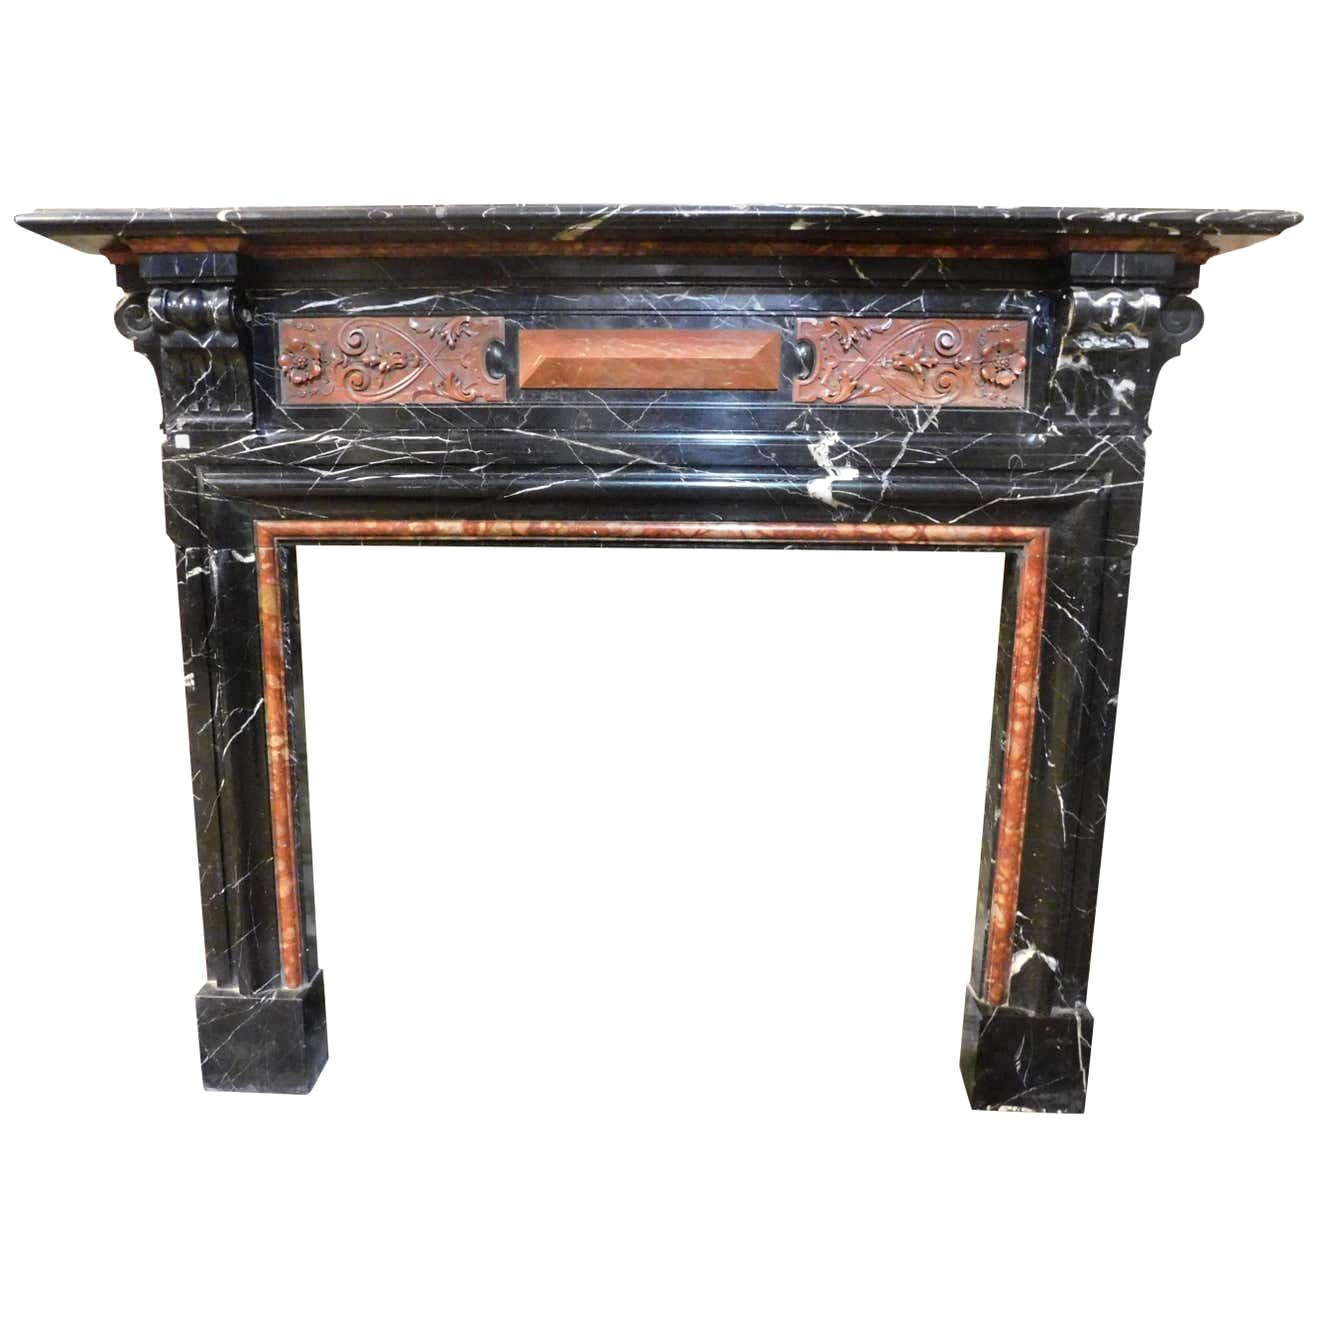 Antique Fireplace Mantle Black and Red Marble Inlaid, 19th Century from Belgium For Sale